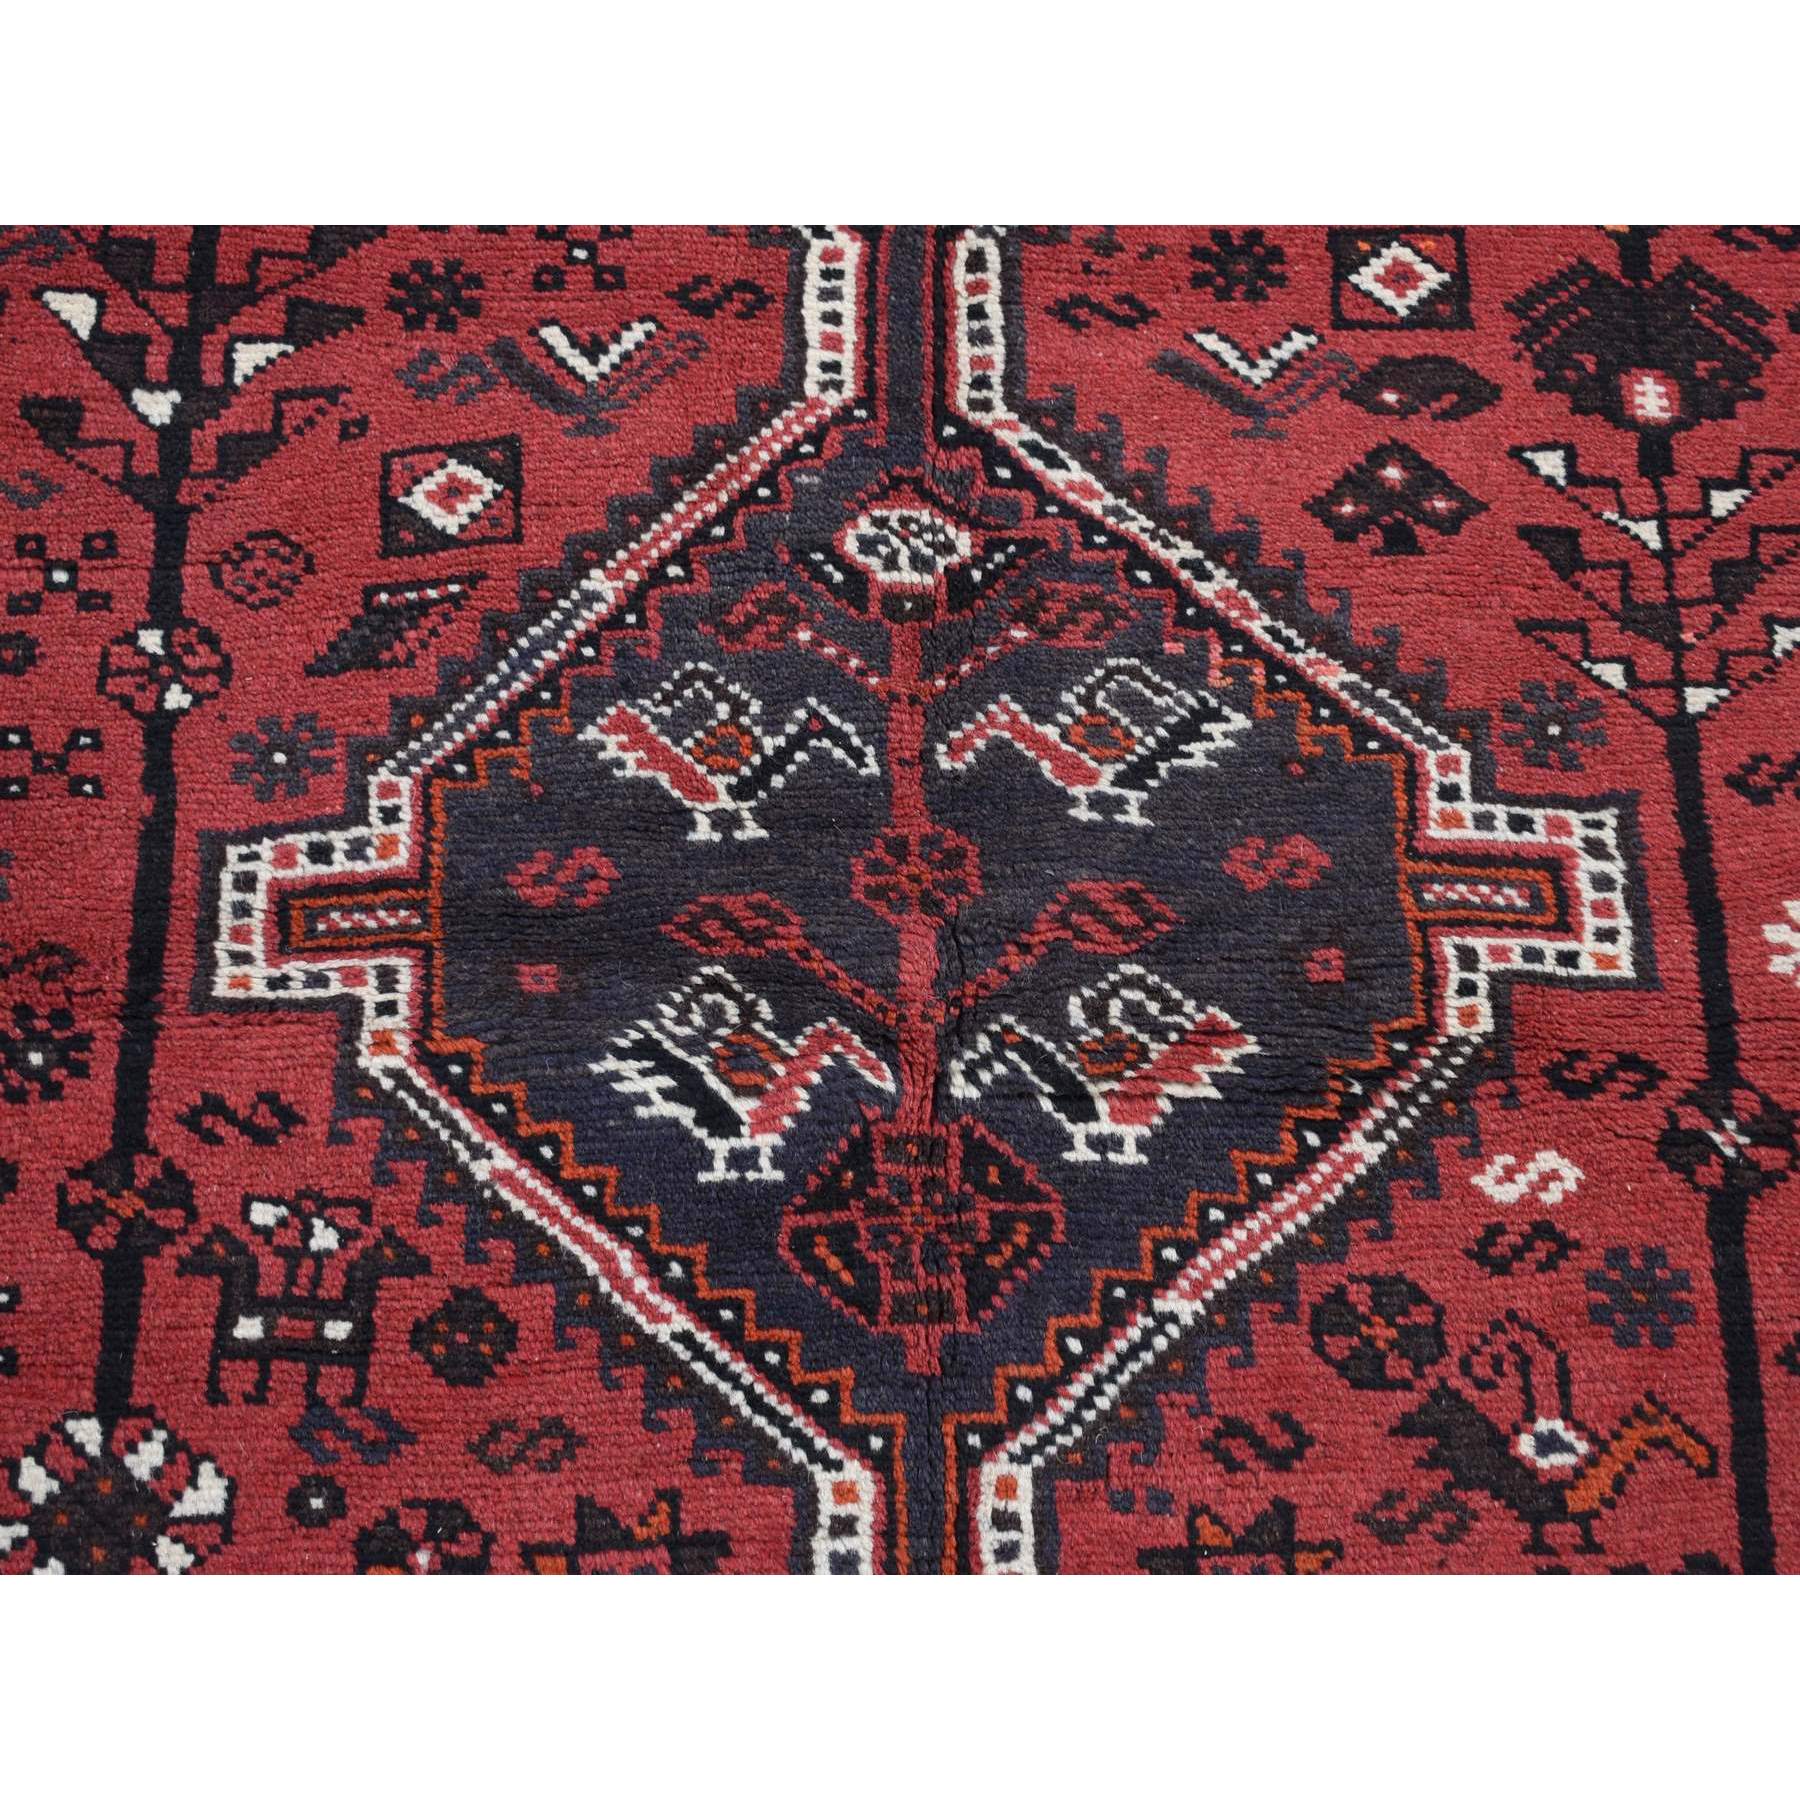 4'8"x6'10" Cardinals Red, New Persian Shiraz, Full Pile, Pure Wool, Hand Woven, Oriental Rug 